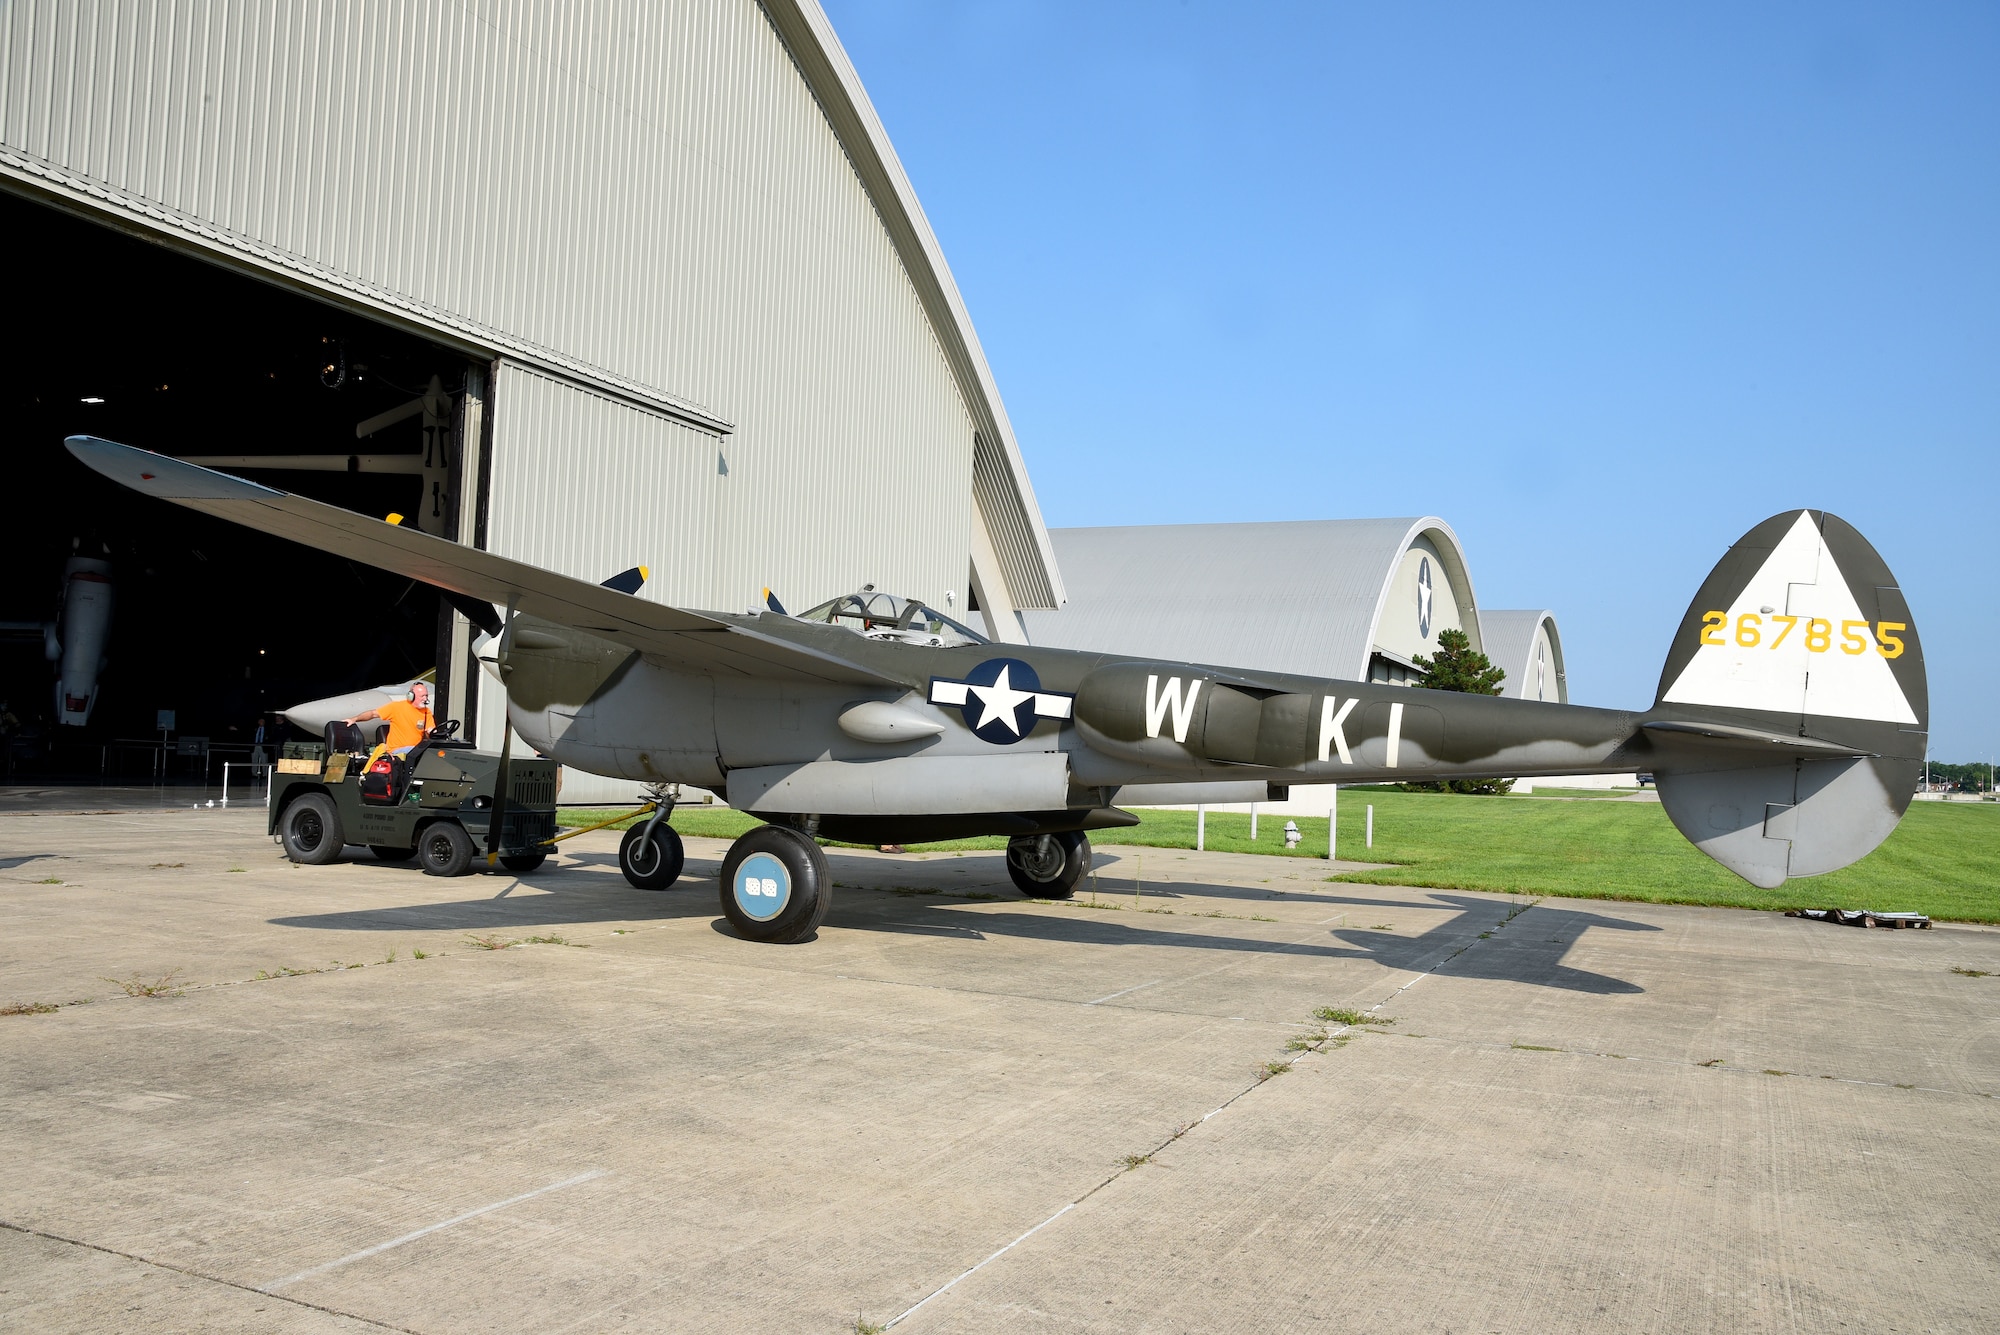 Roger Brigner, a museum restoration specialist at the National Museum of the U.S. Air Force, moves the Lockheed P-38L Lightning toward the WWII Gallery on Aug. 13, 2018. Several WWII era aircraft were temporarily placed throughout the museum to provide adequate space for the Memphis Belle exhibit opening events. (U.S. Air Force photo by Ken LaRock)